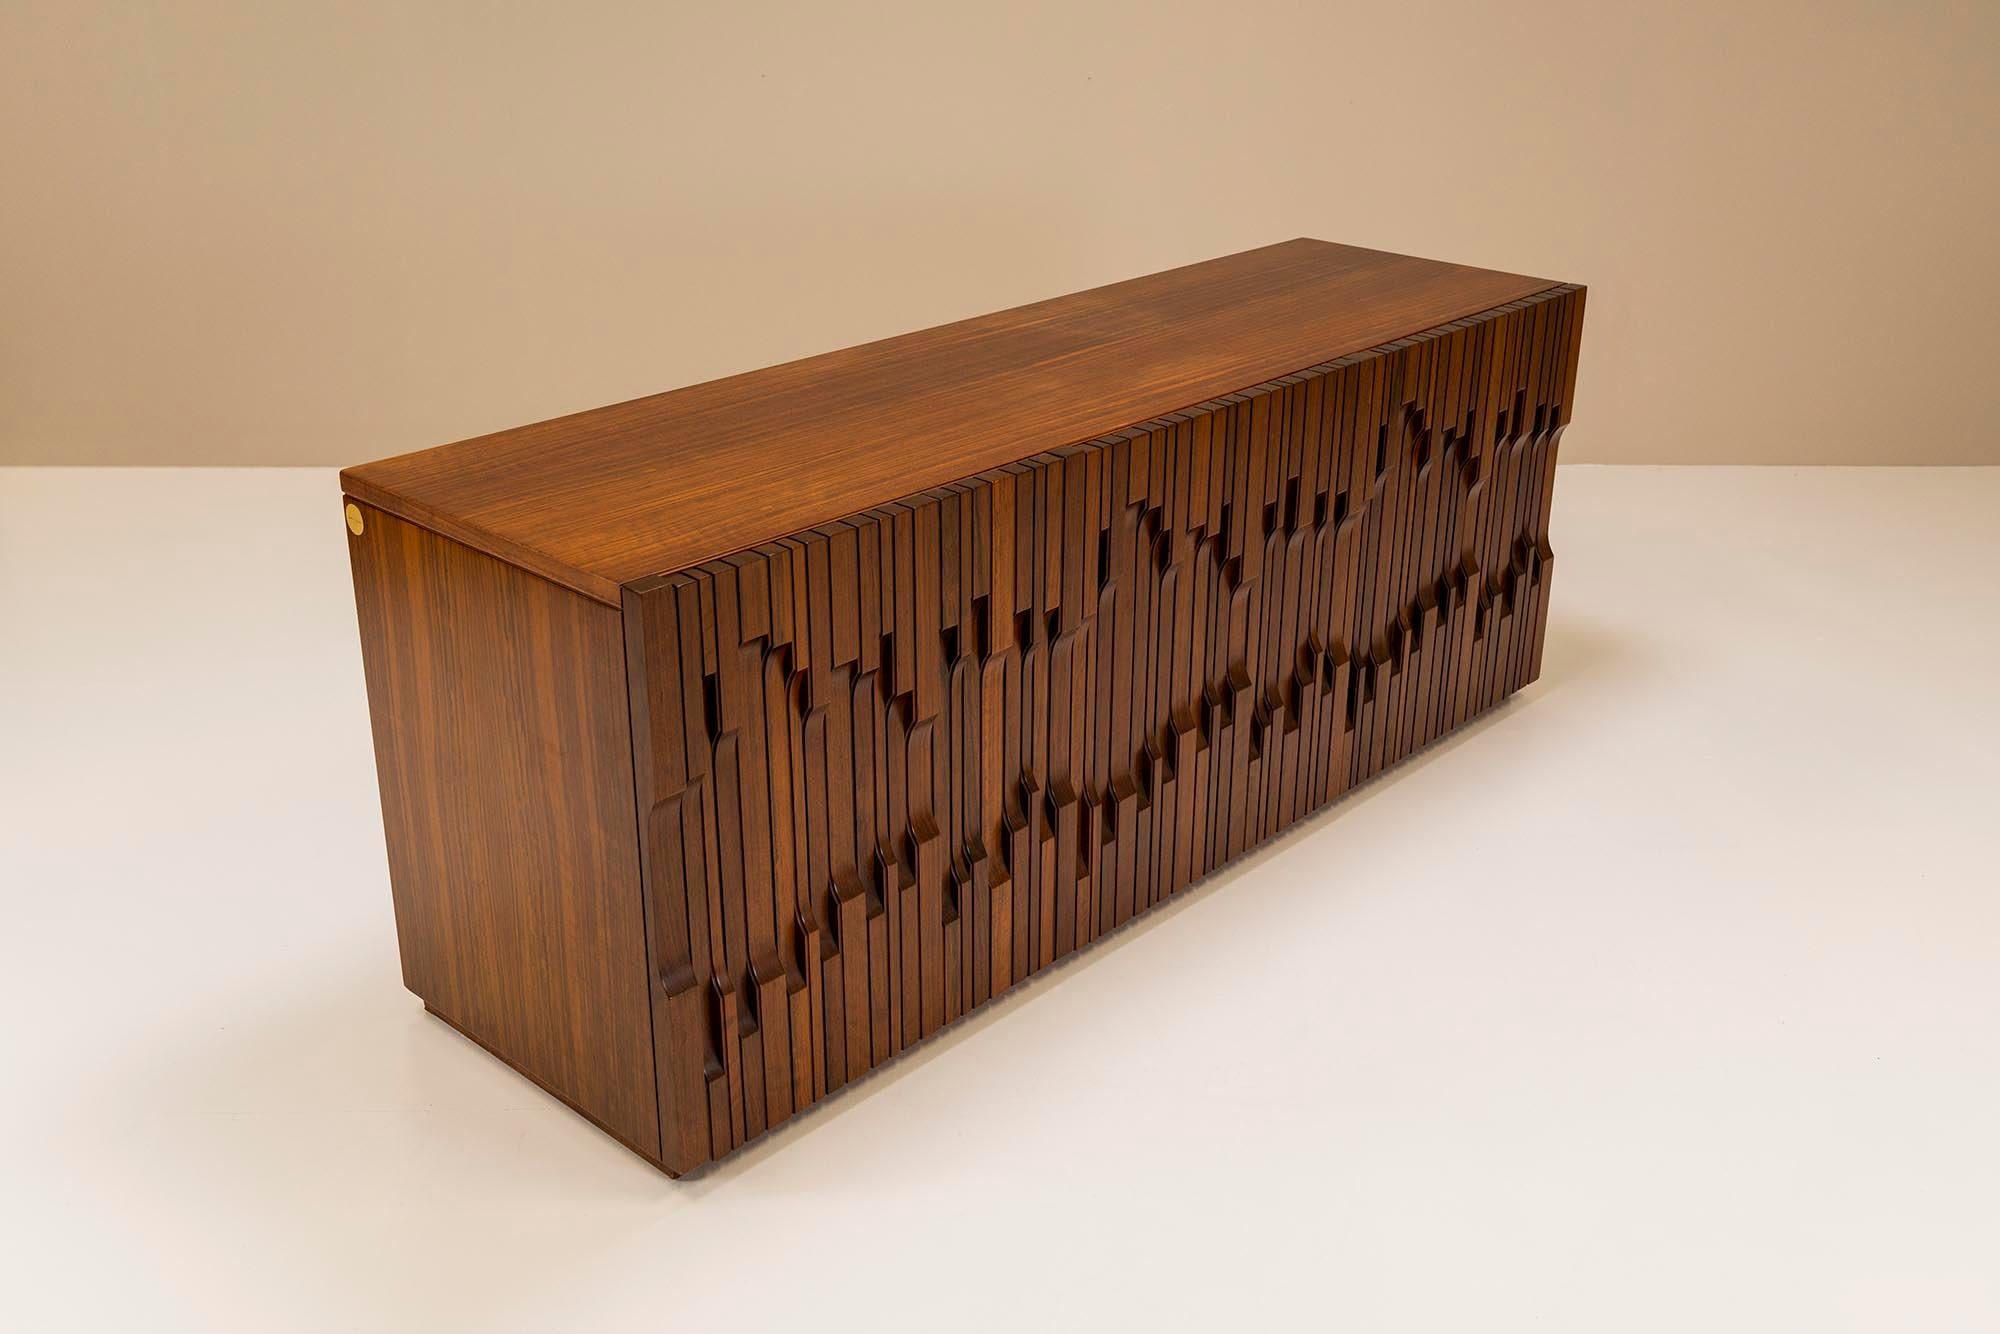 A beautiful Italian brutalist sideboard from the 